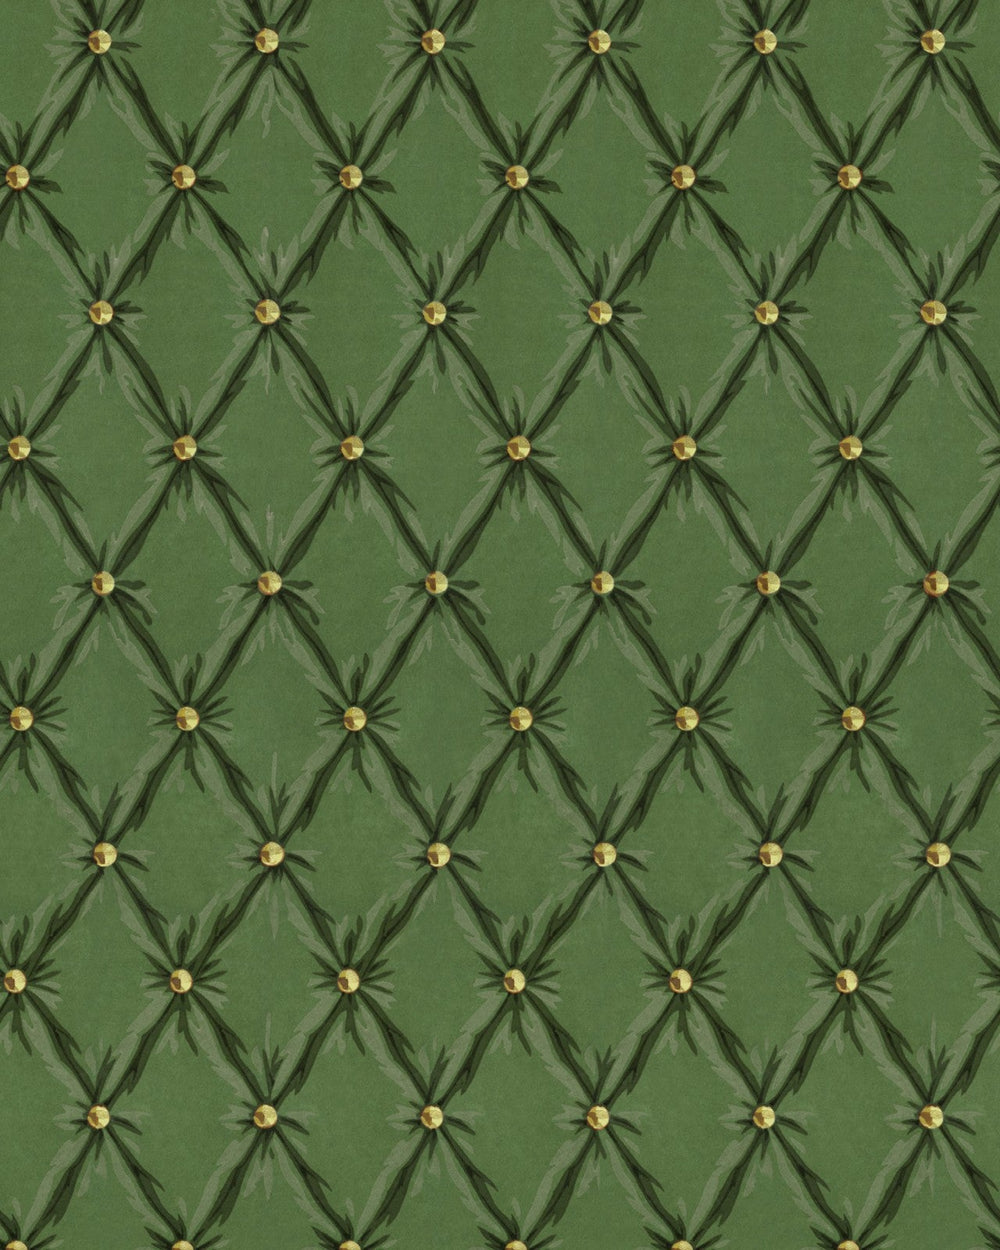 Mind-the-gap-wallpaper-orient-express-tufted-panel-velvet-chesterfield-style-padded-wall-gold-buttons-3d-effect-forest-green-WP30171